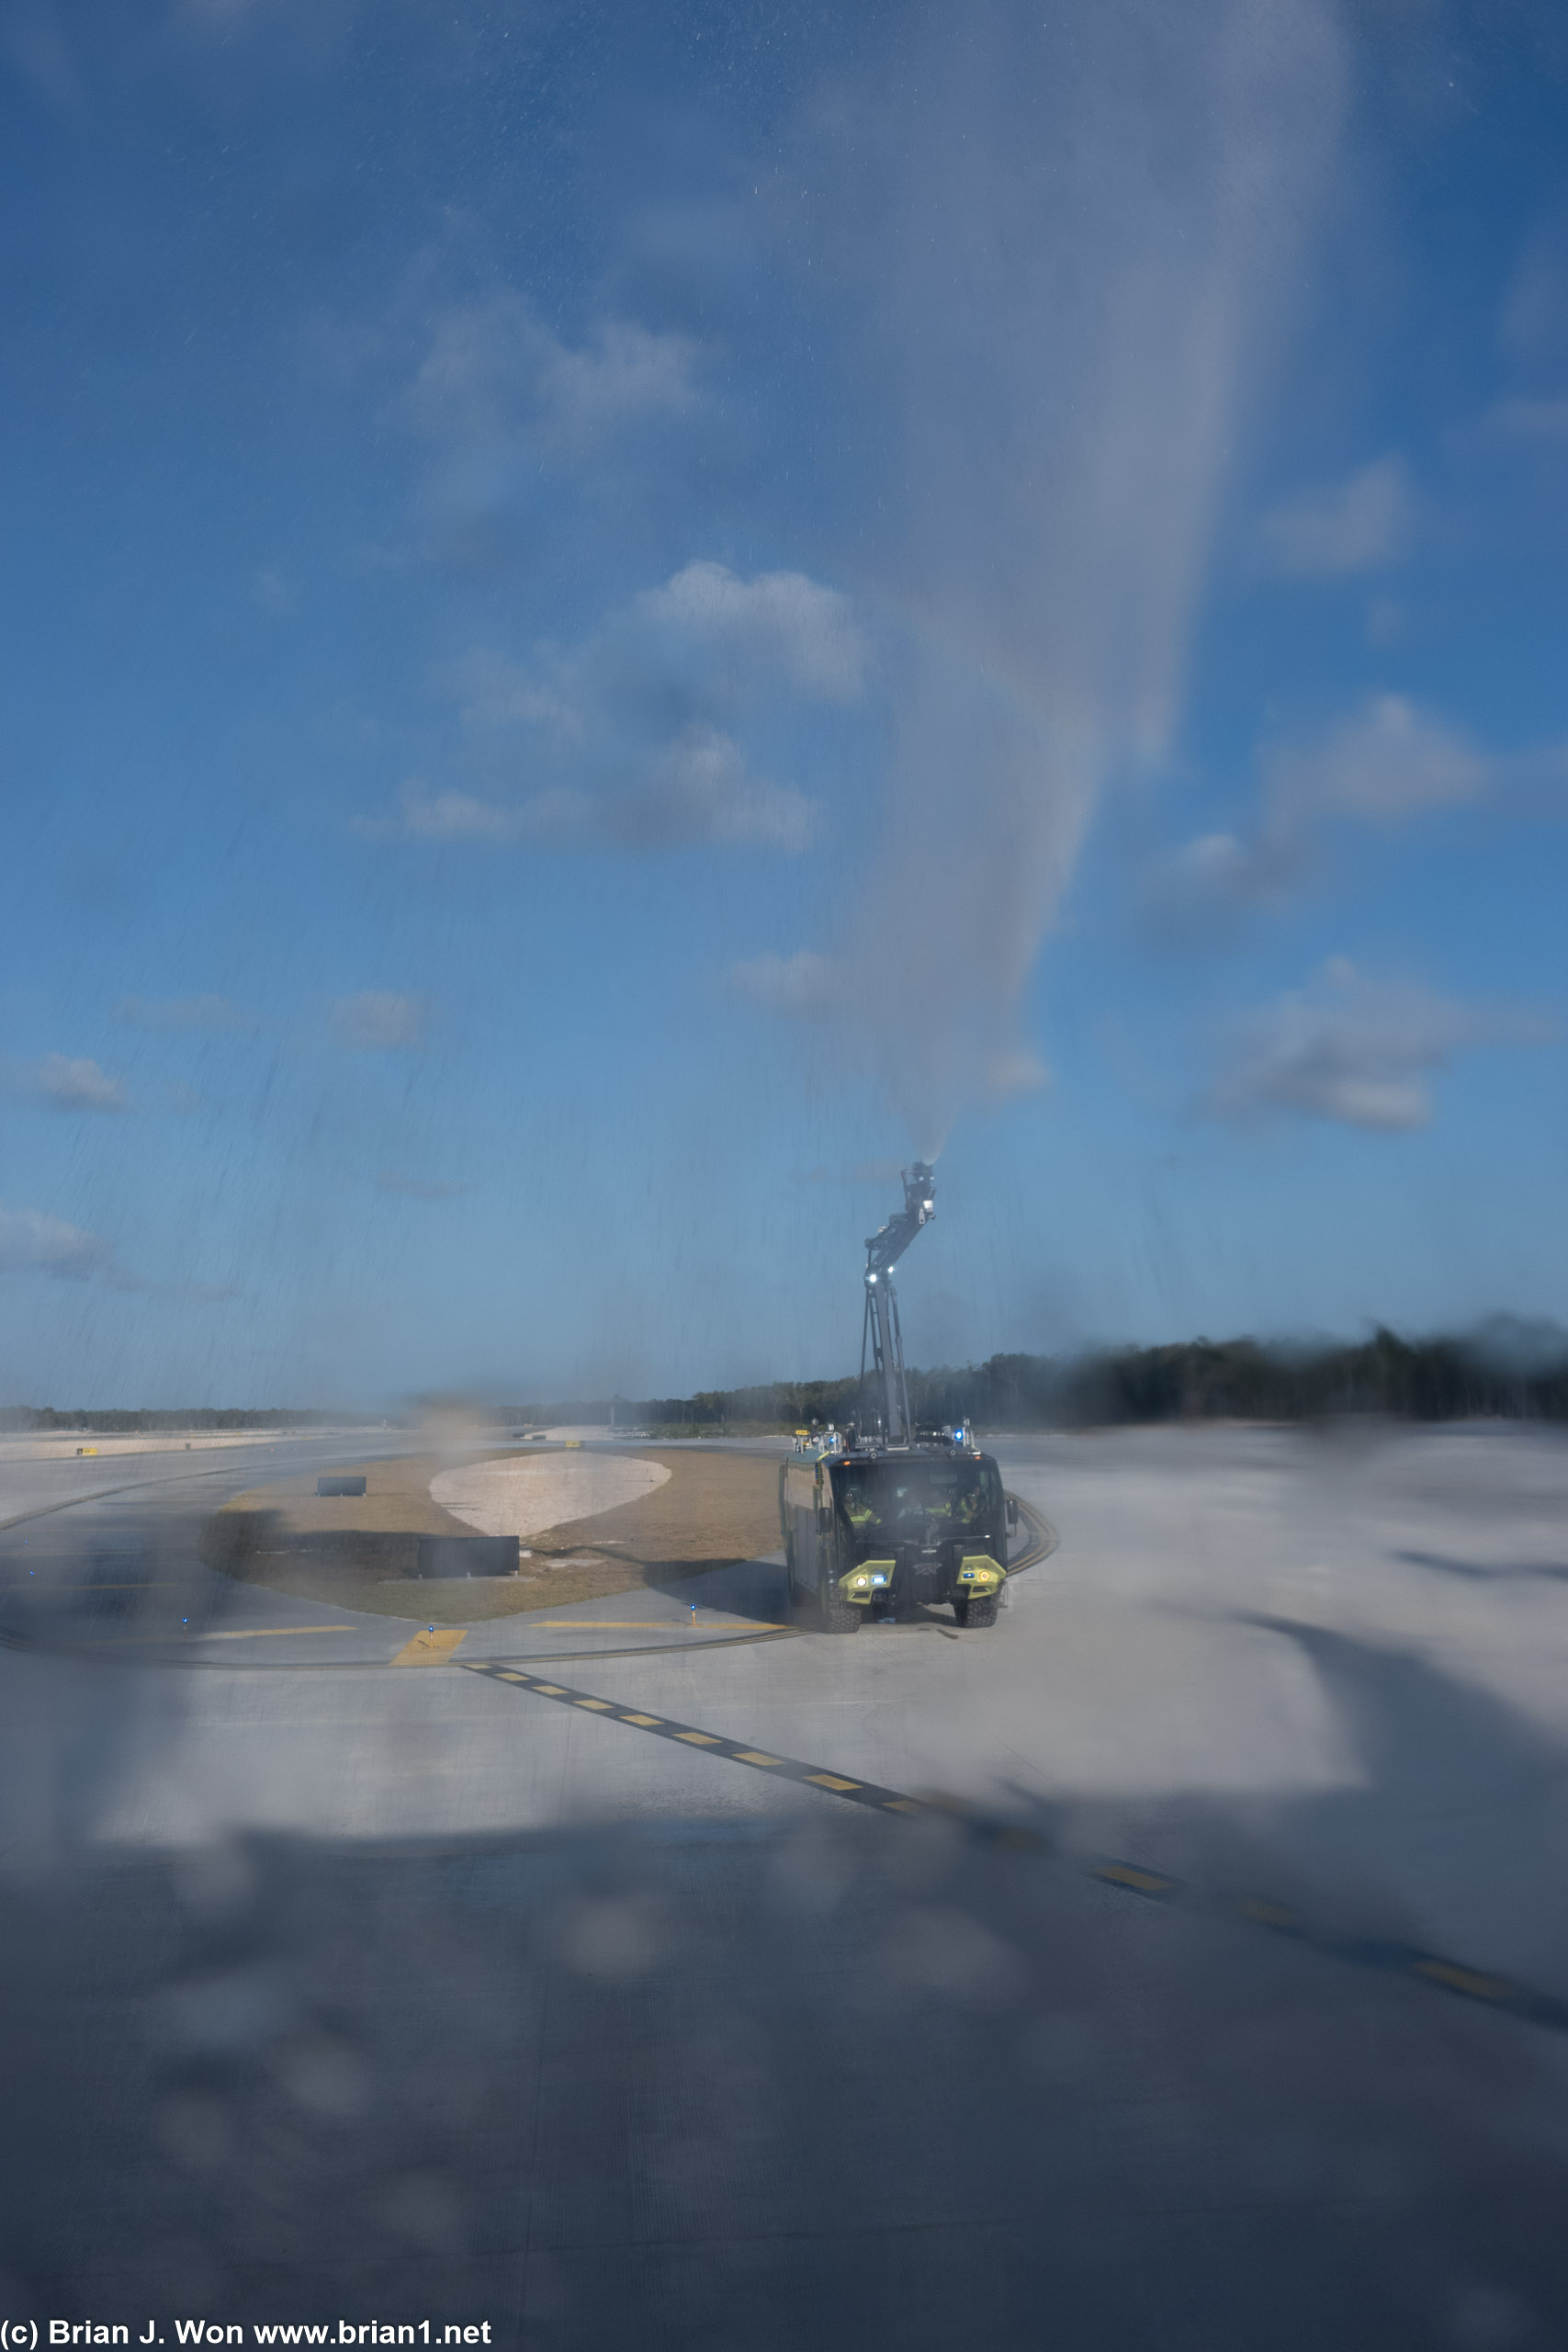 Water cannon salute for United's TQO-LAX inaugural.